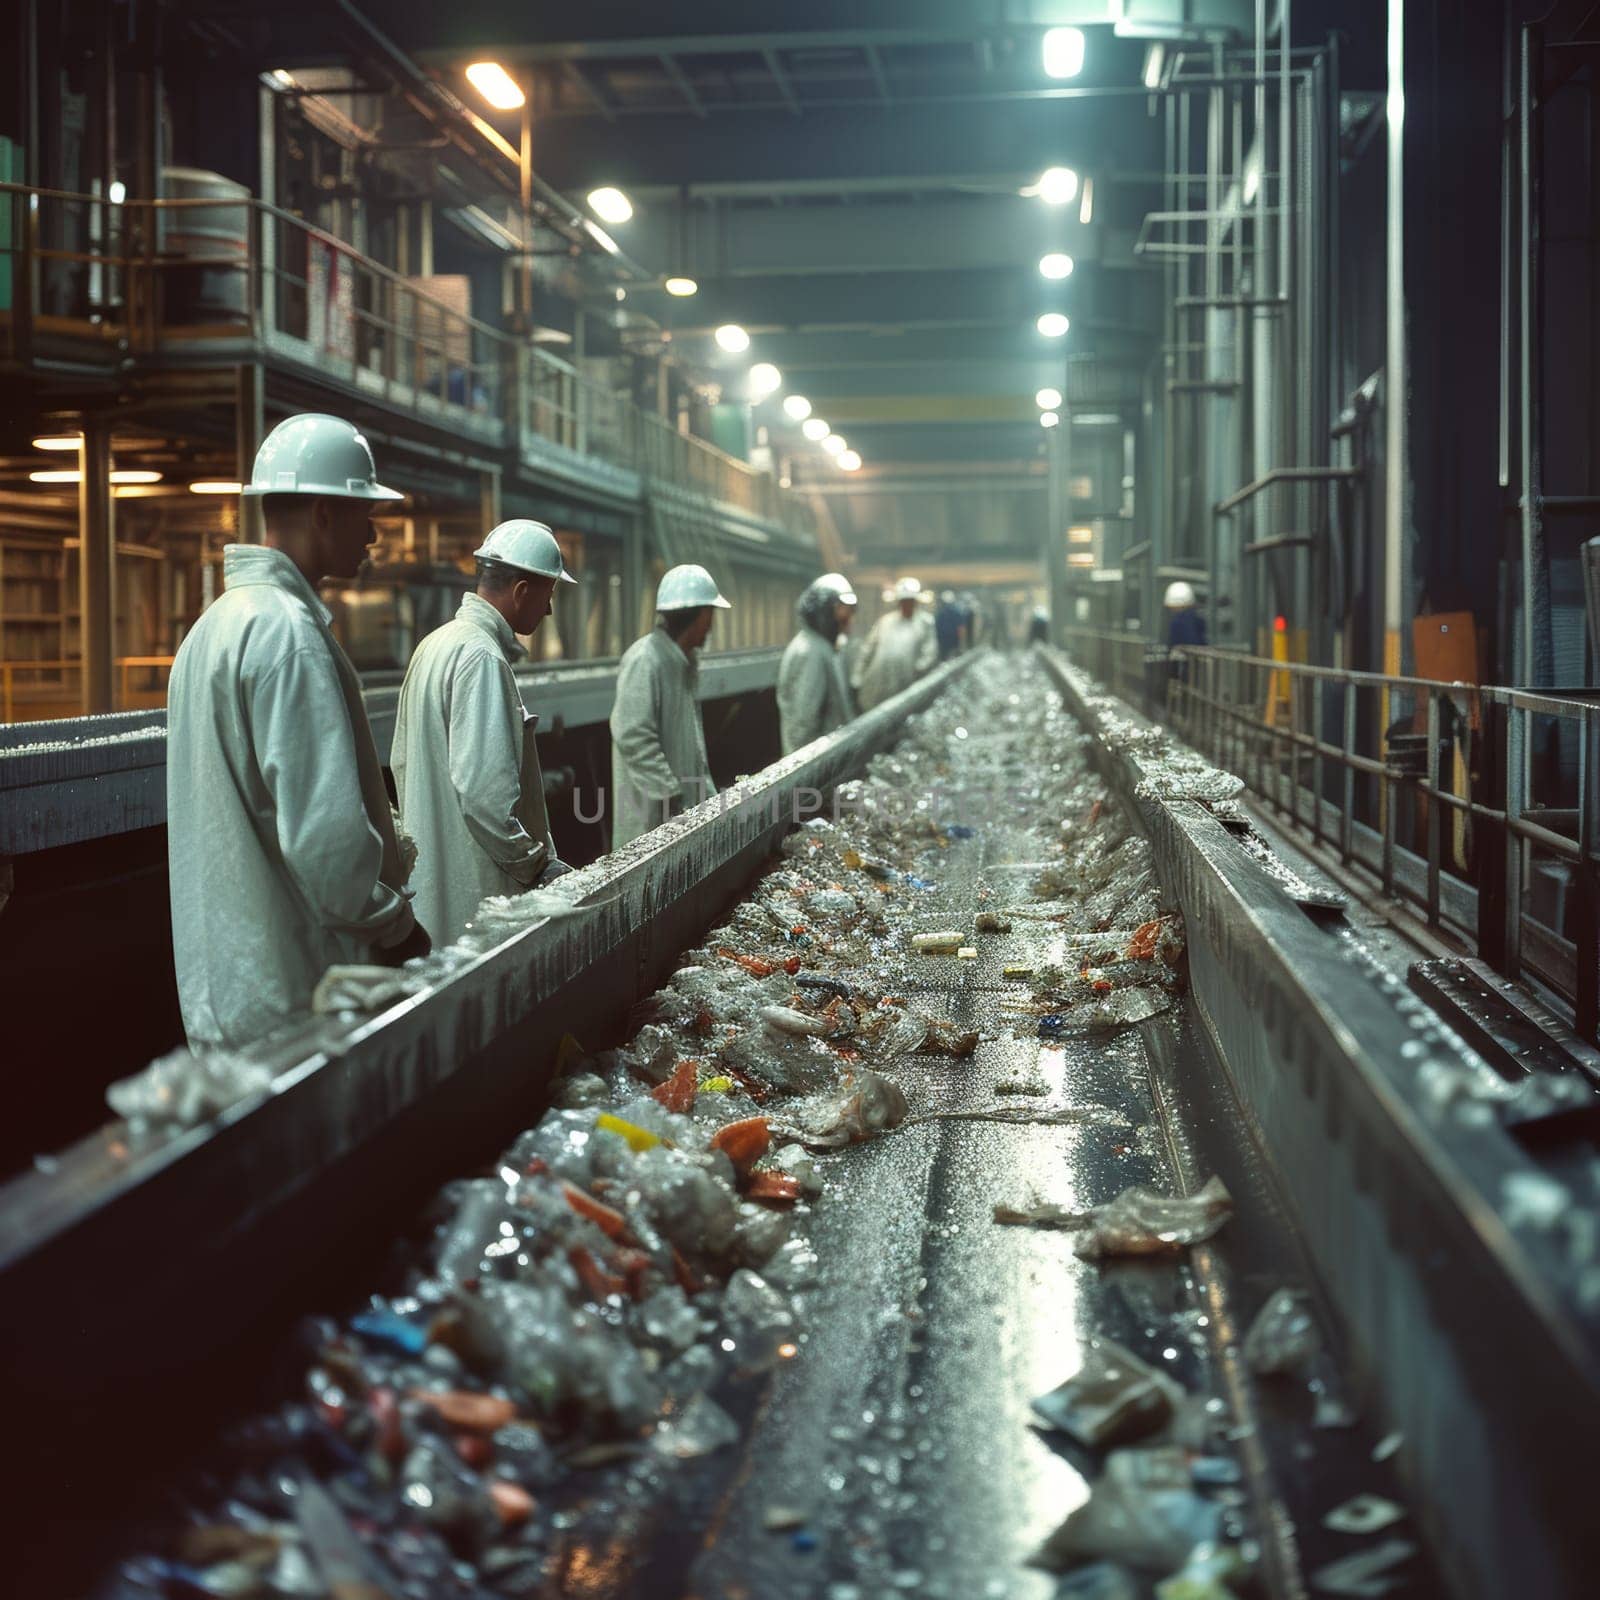 Workers in bright orange uniforms sorting waste on a conveyor belt at a waste treatment facility. by sfinks